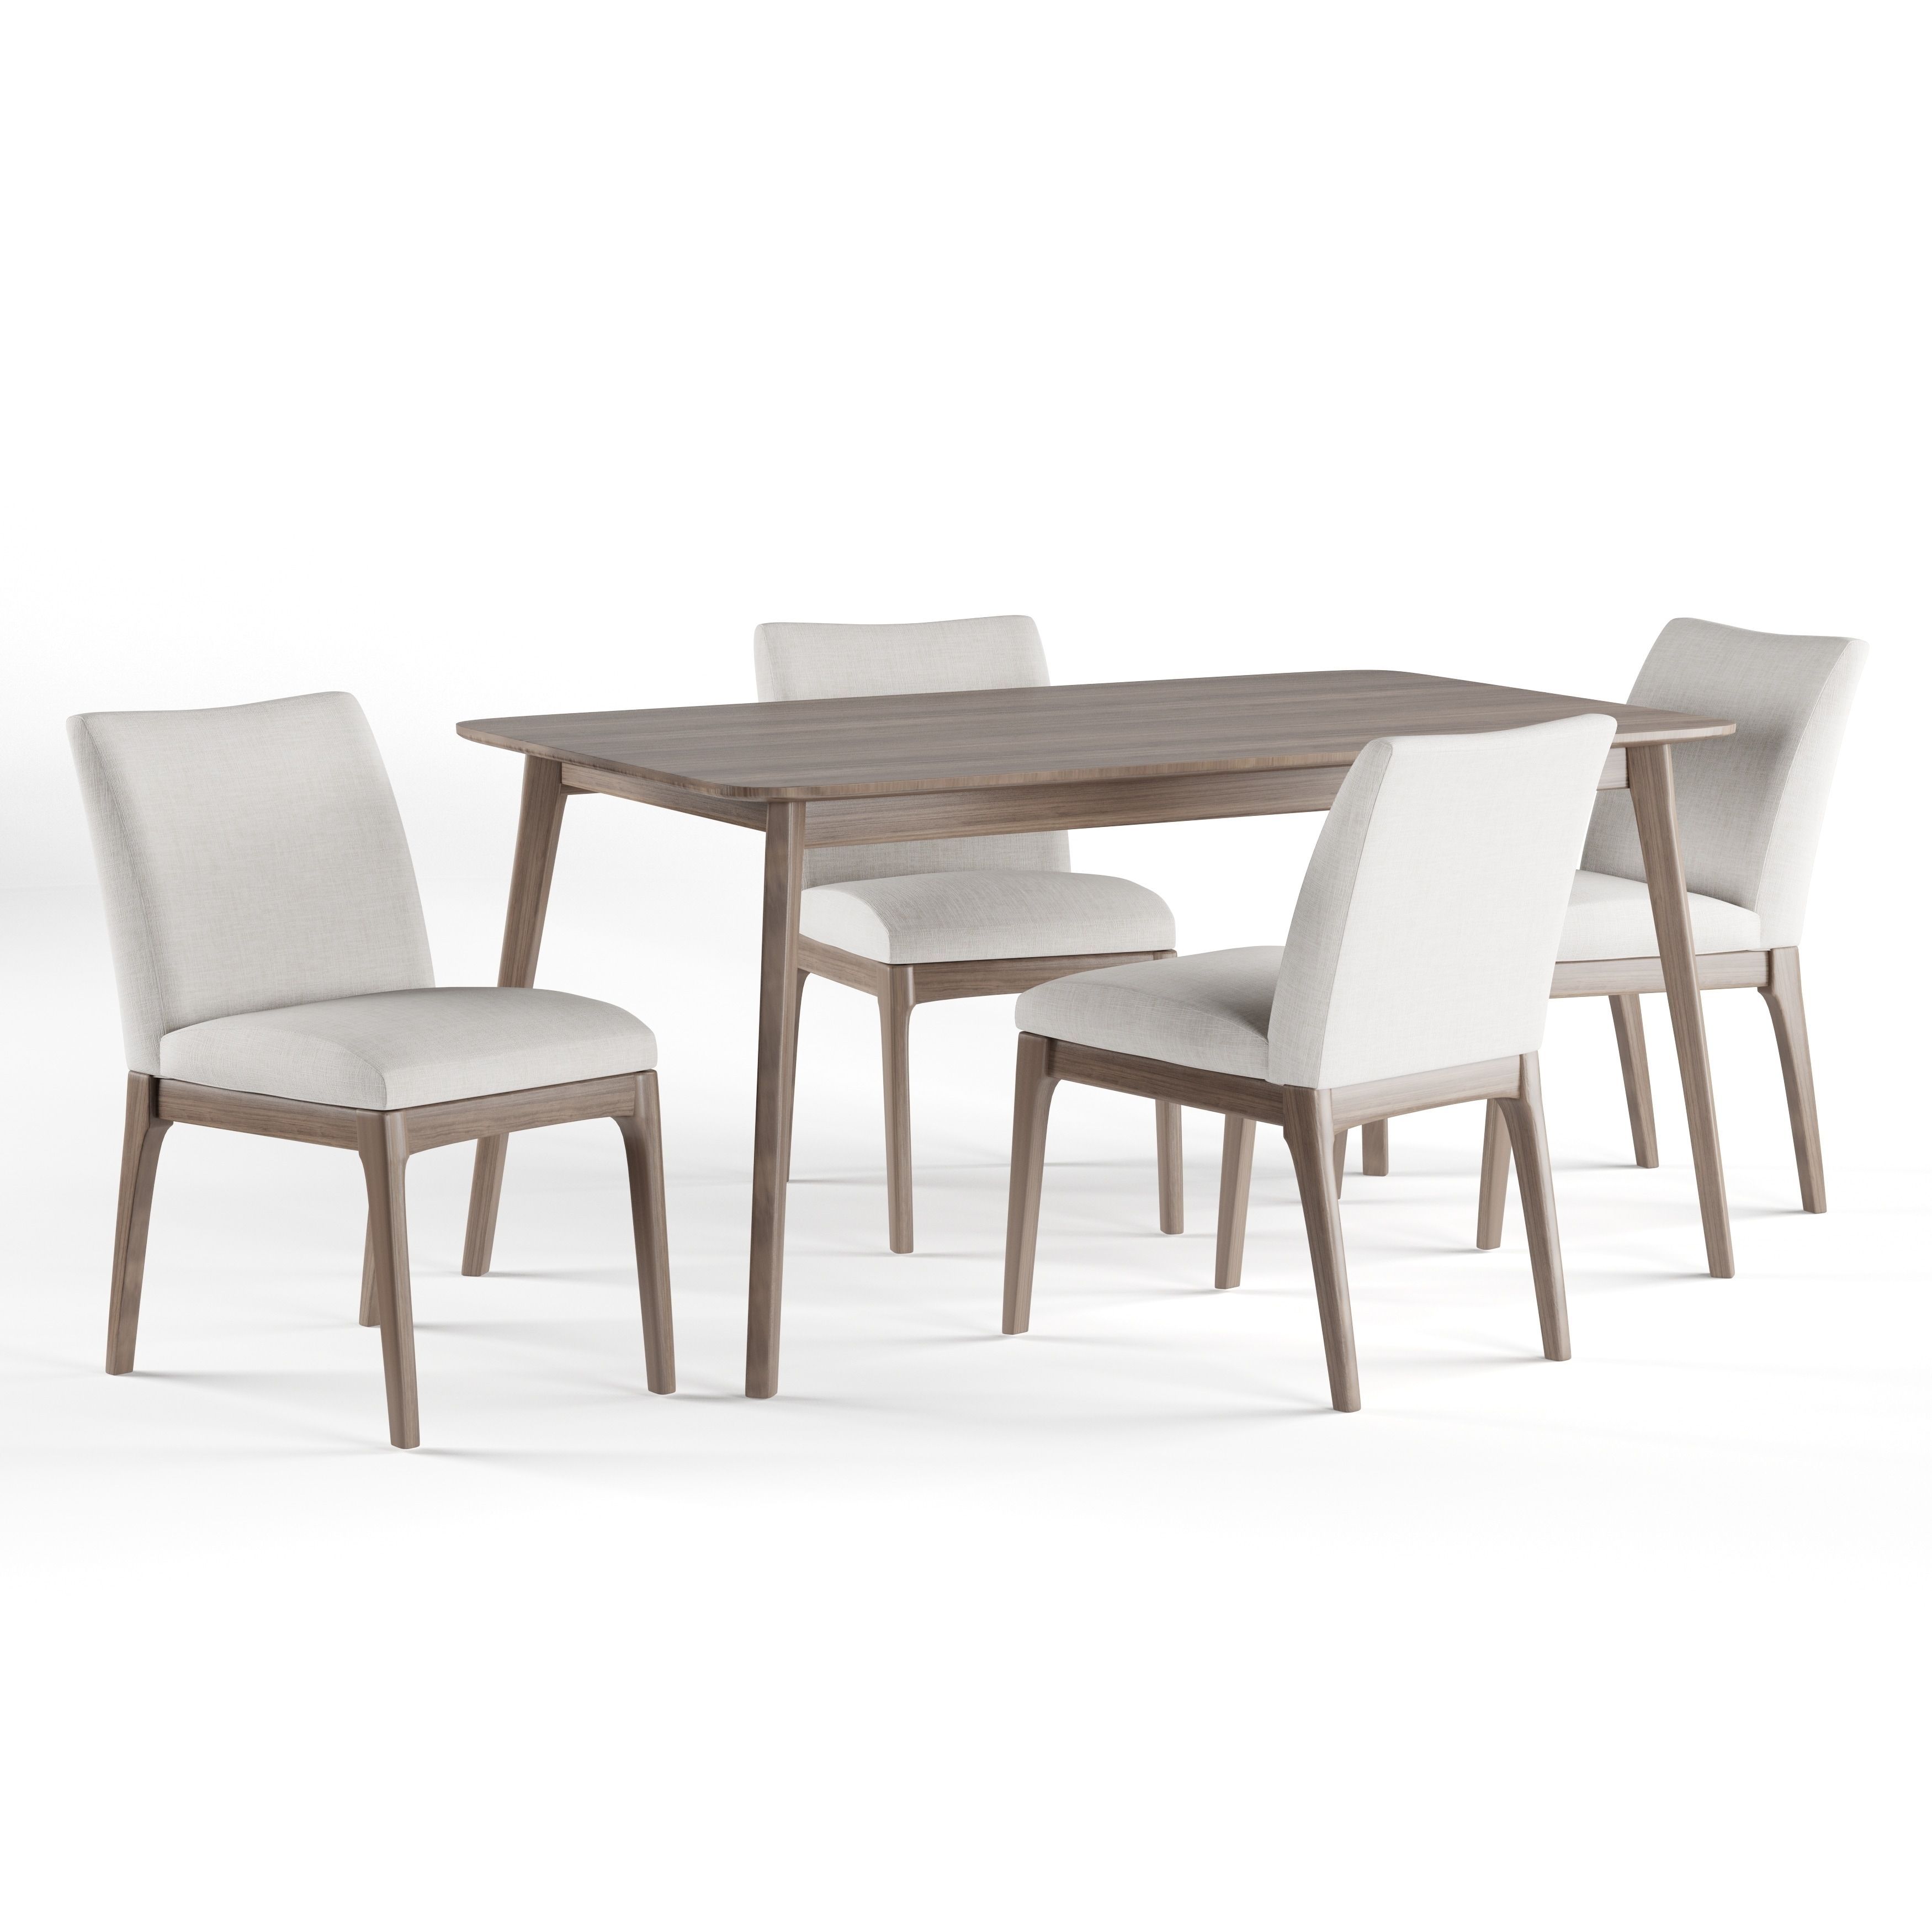 Toby 7 Piece Dining Setorren Ellis Reviews Within Most Up To Date Helms 7 Piece Rectangle Dining Sets (View 7 of 20)